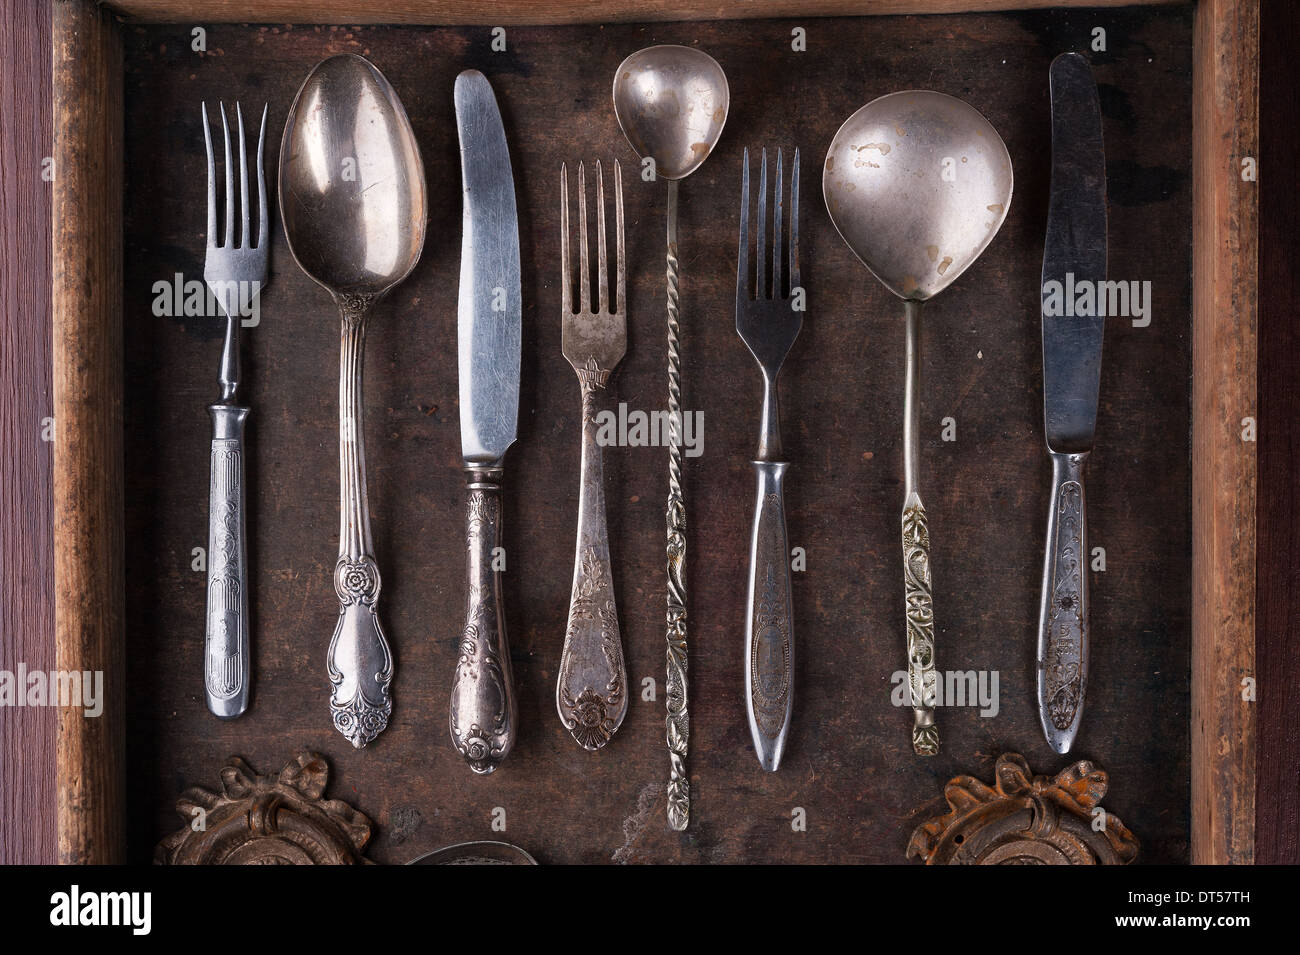 Old cutlery in an old wooden box Stock Photo